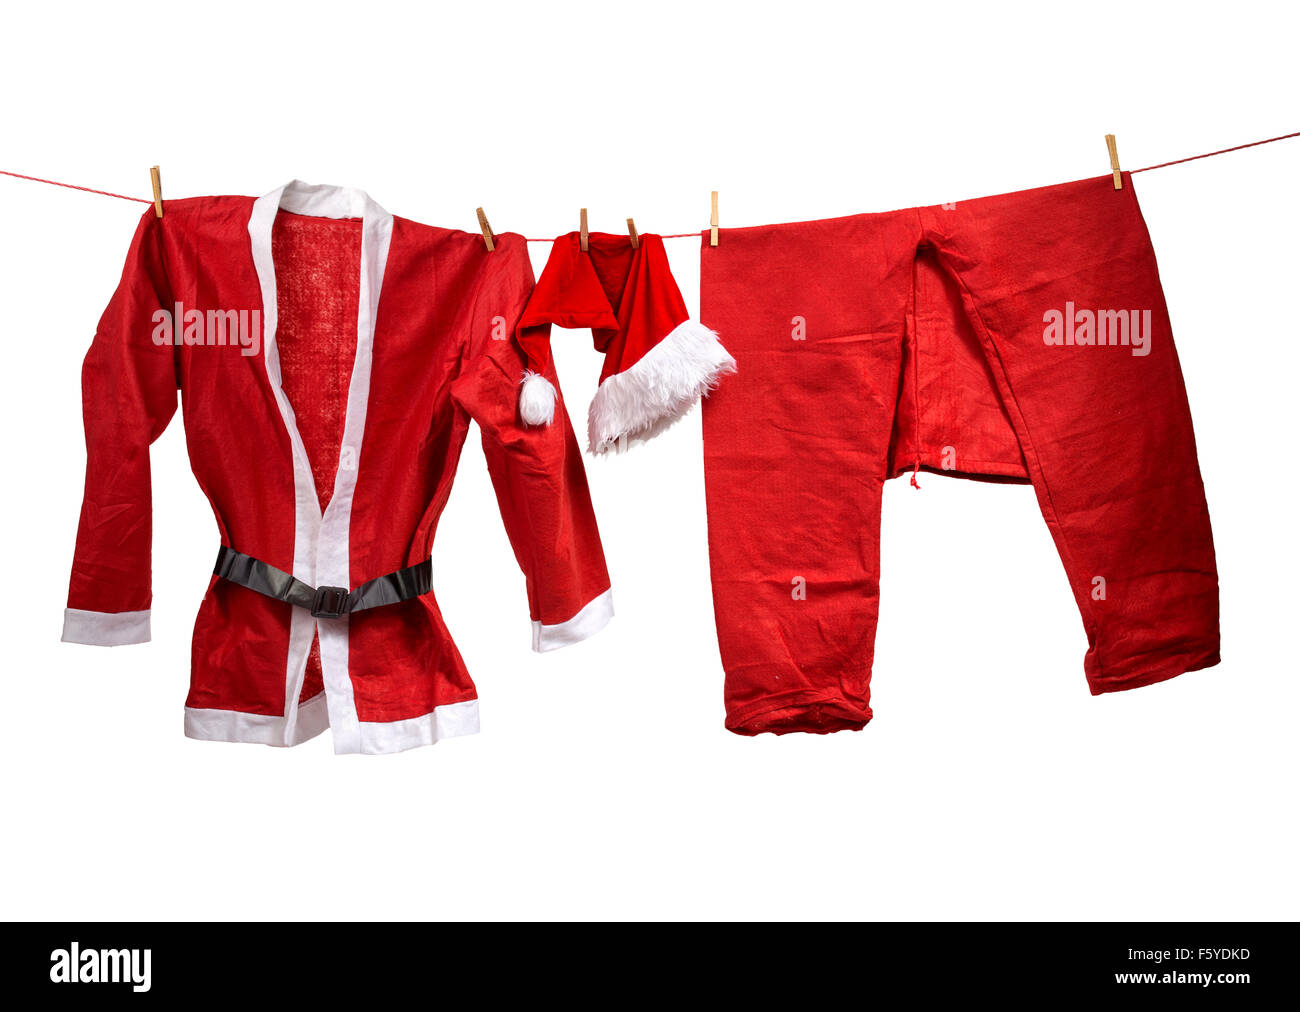 The Santa Claus clothes on the clothesline Stock Photo